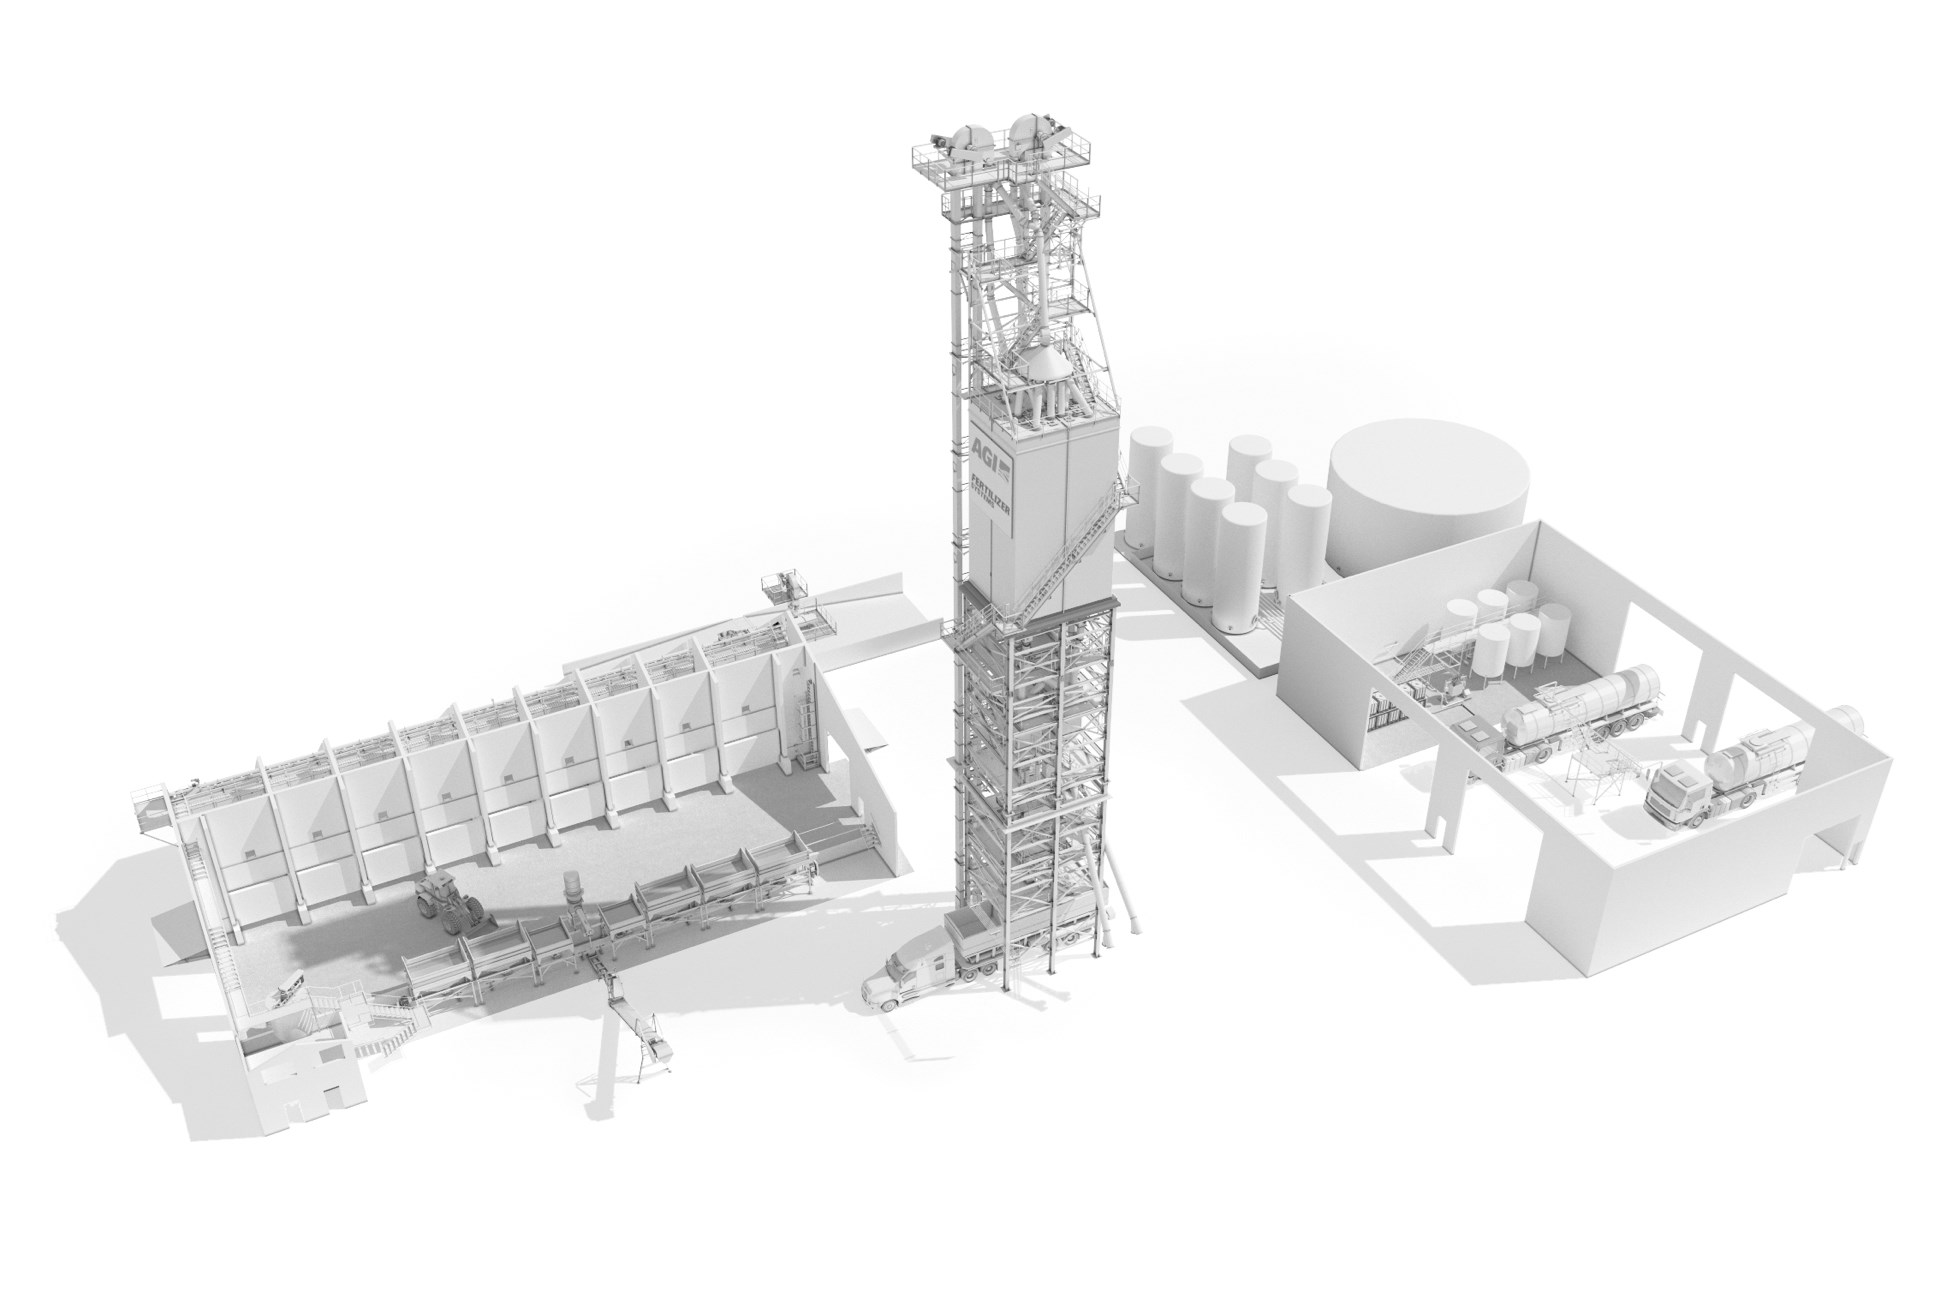 Equipment and solutions for bulk fertilizer and industrial material handling, from engineering and design to manufacturing and installation. Image